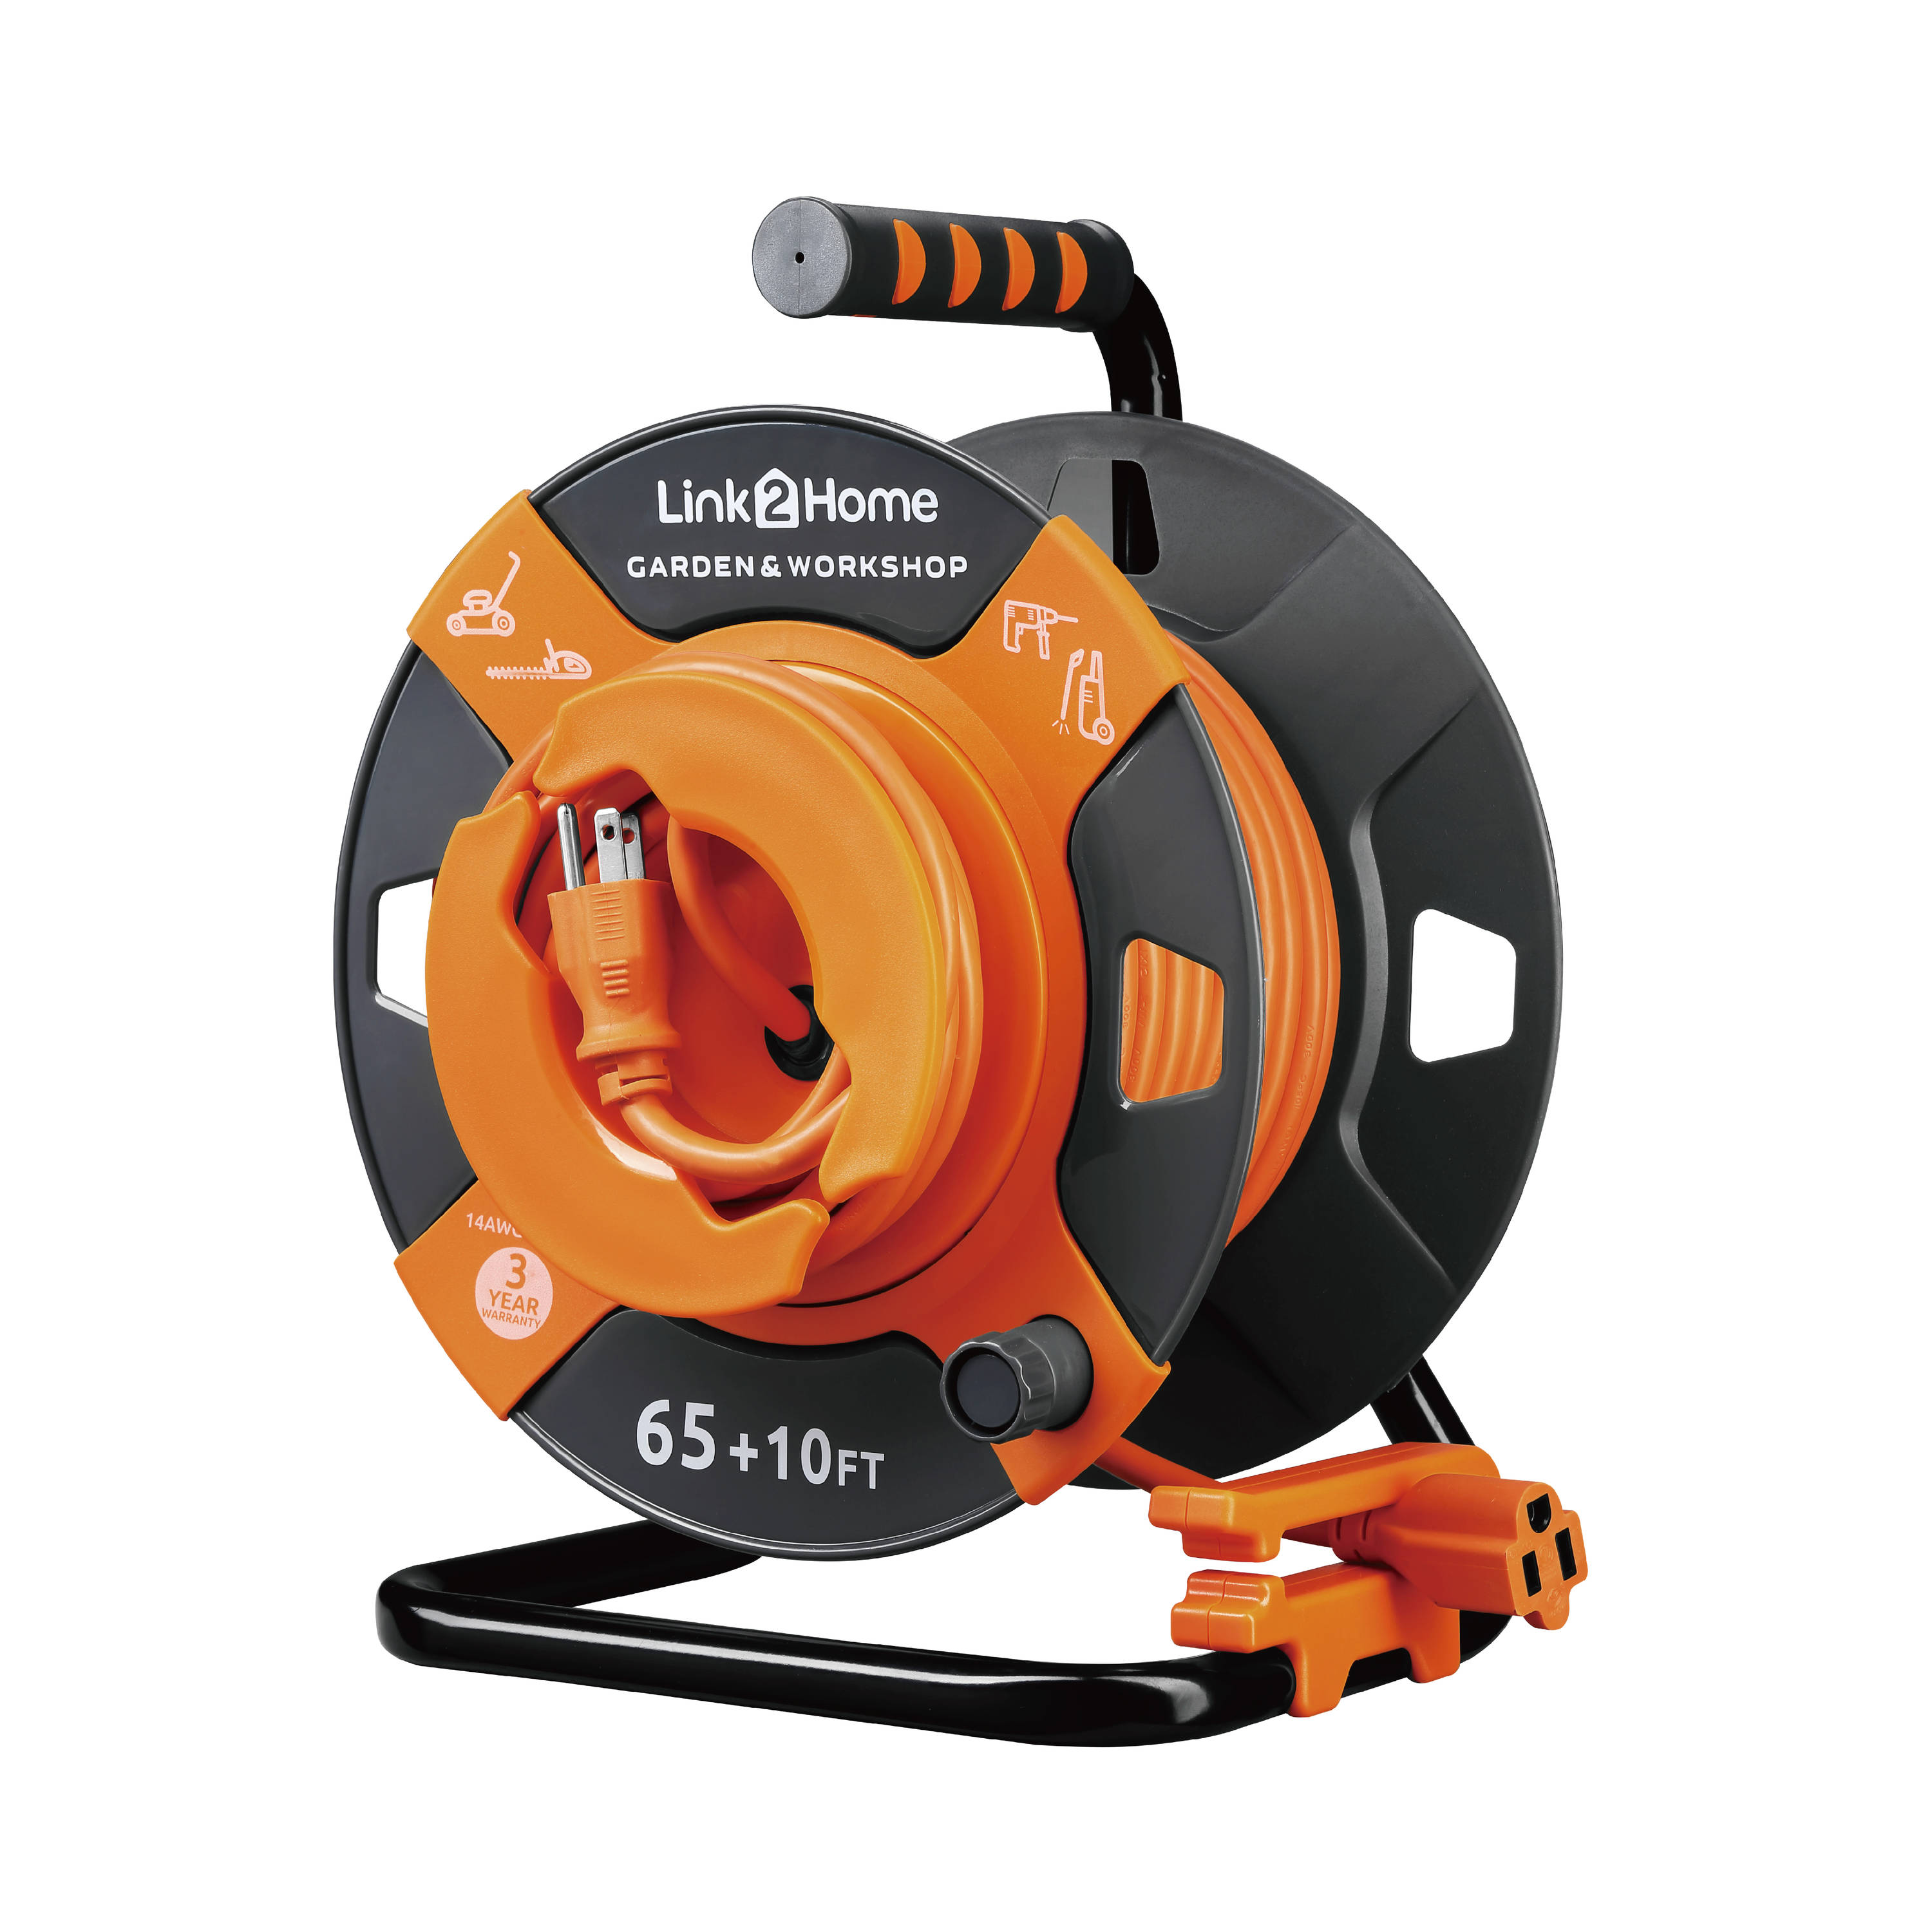 Craftsman Contractor Grade Retractable Extension Cord, 75 ft with 4 Outlets- 12AWG SJTW Cable- Outdoor Power Cord Reel